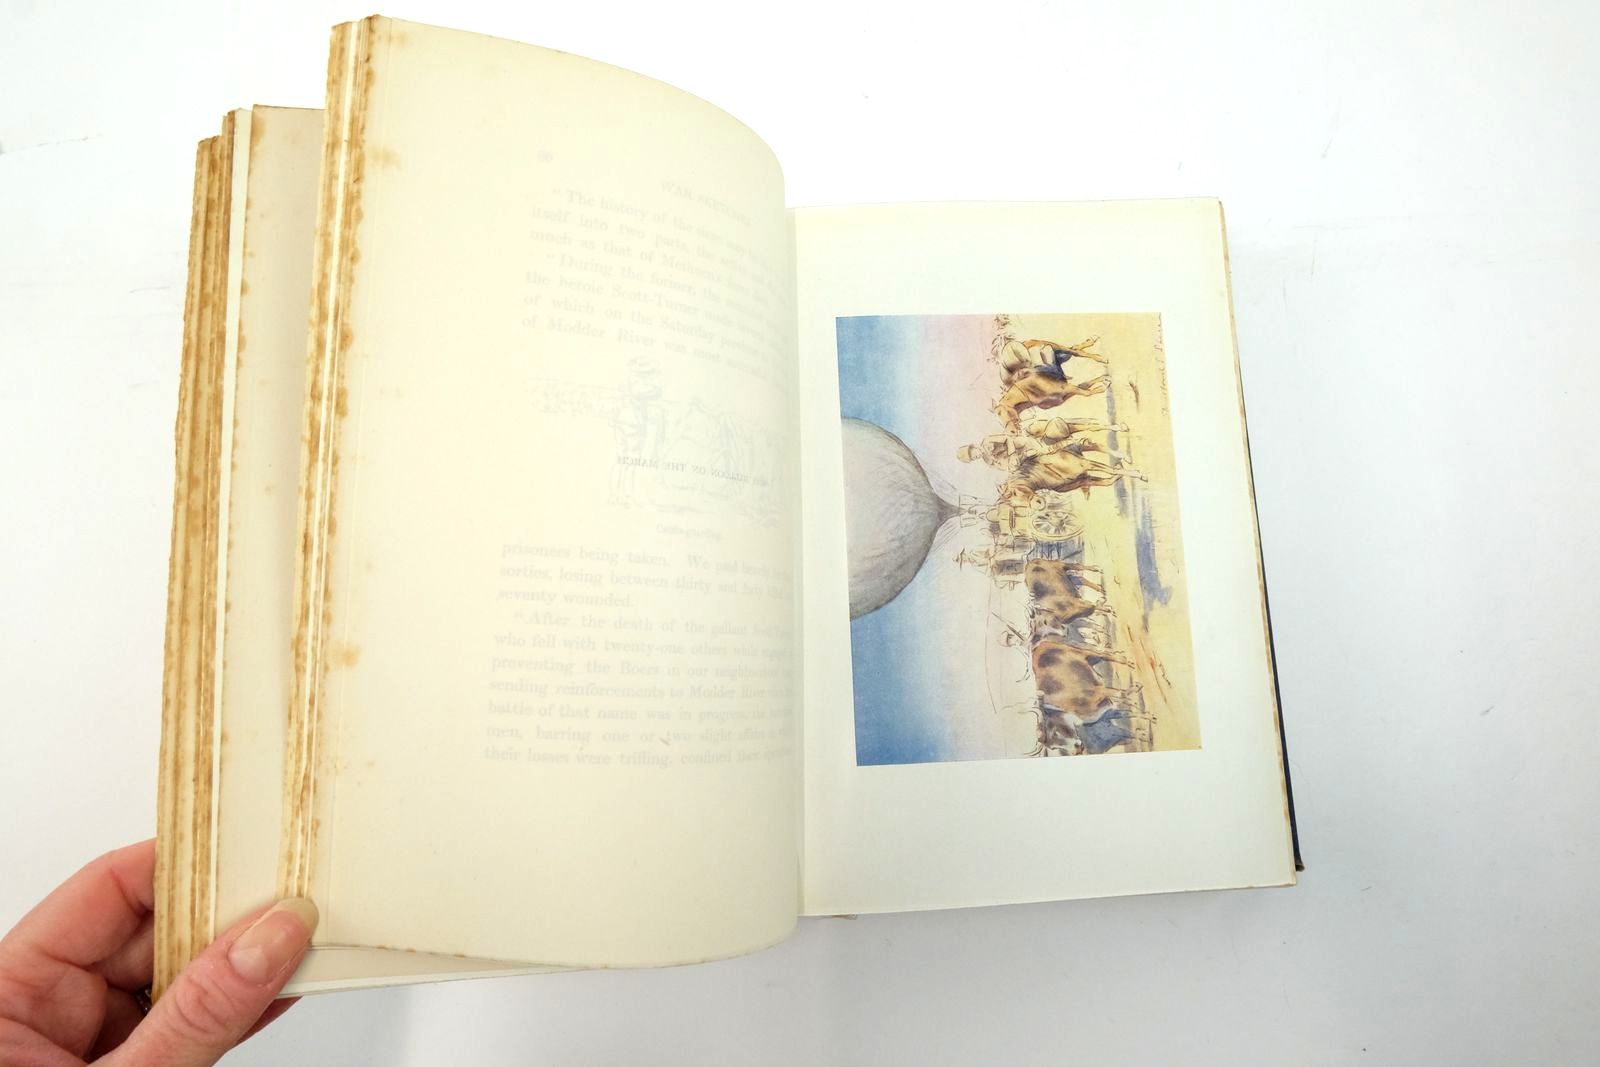 Photo of WAR SKETCHES IN COLOUR written by St. Leger, Captain S.E. published by Adam & Charles Black (STOCK CODE: 2137507)  for sale by Stella & Rose's Books